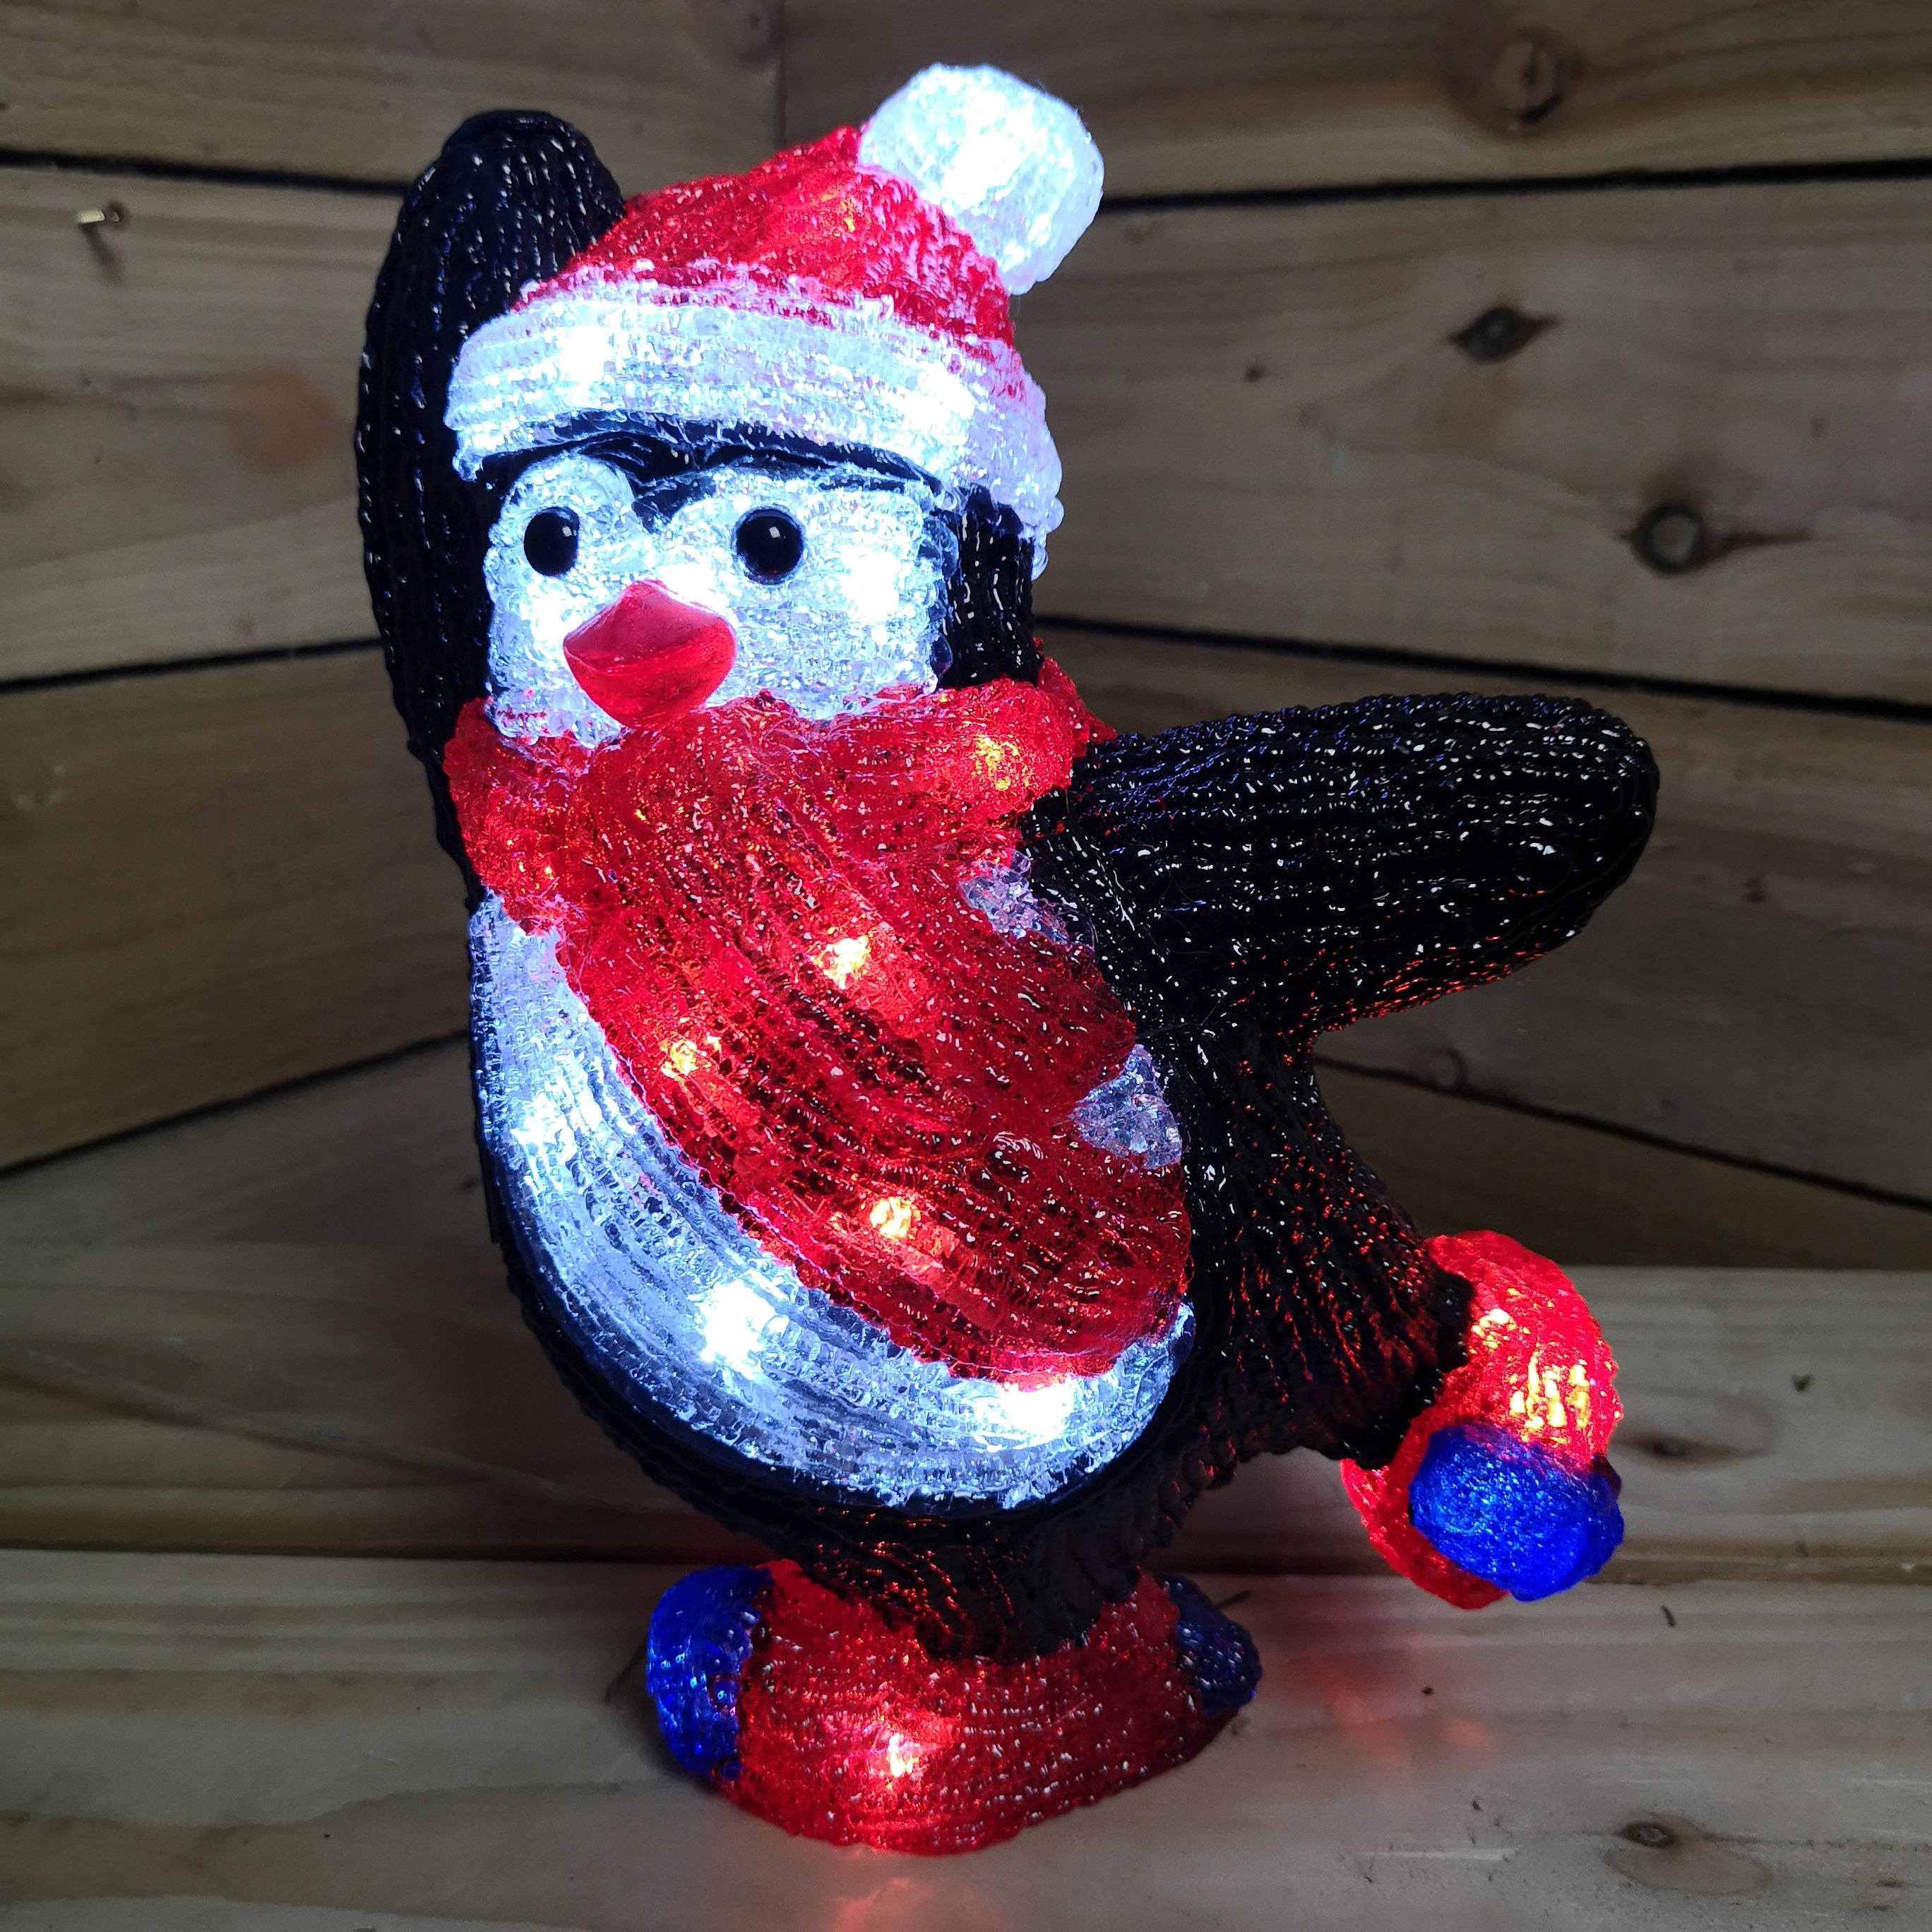 Snowtime 30cm Acrylic Christmas Penguin with Red Hat and Scarf - 30 Ice White LEDs